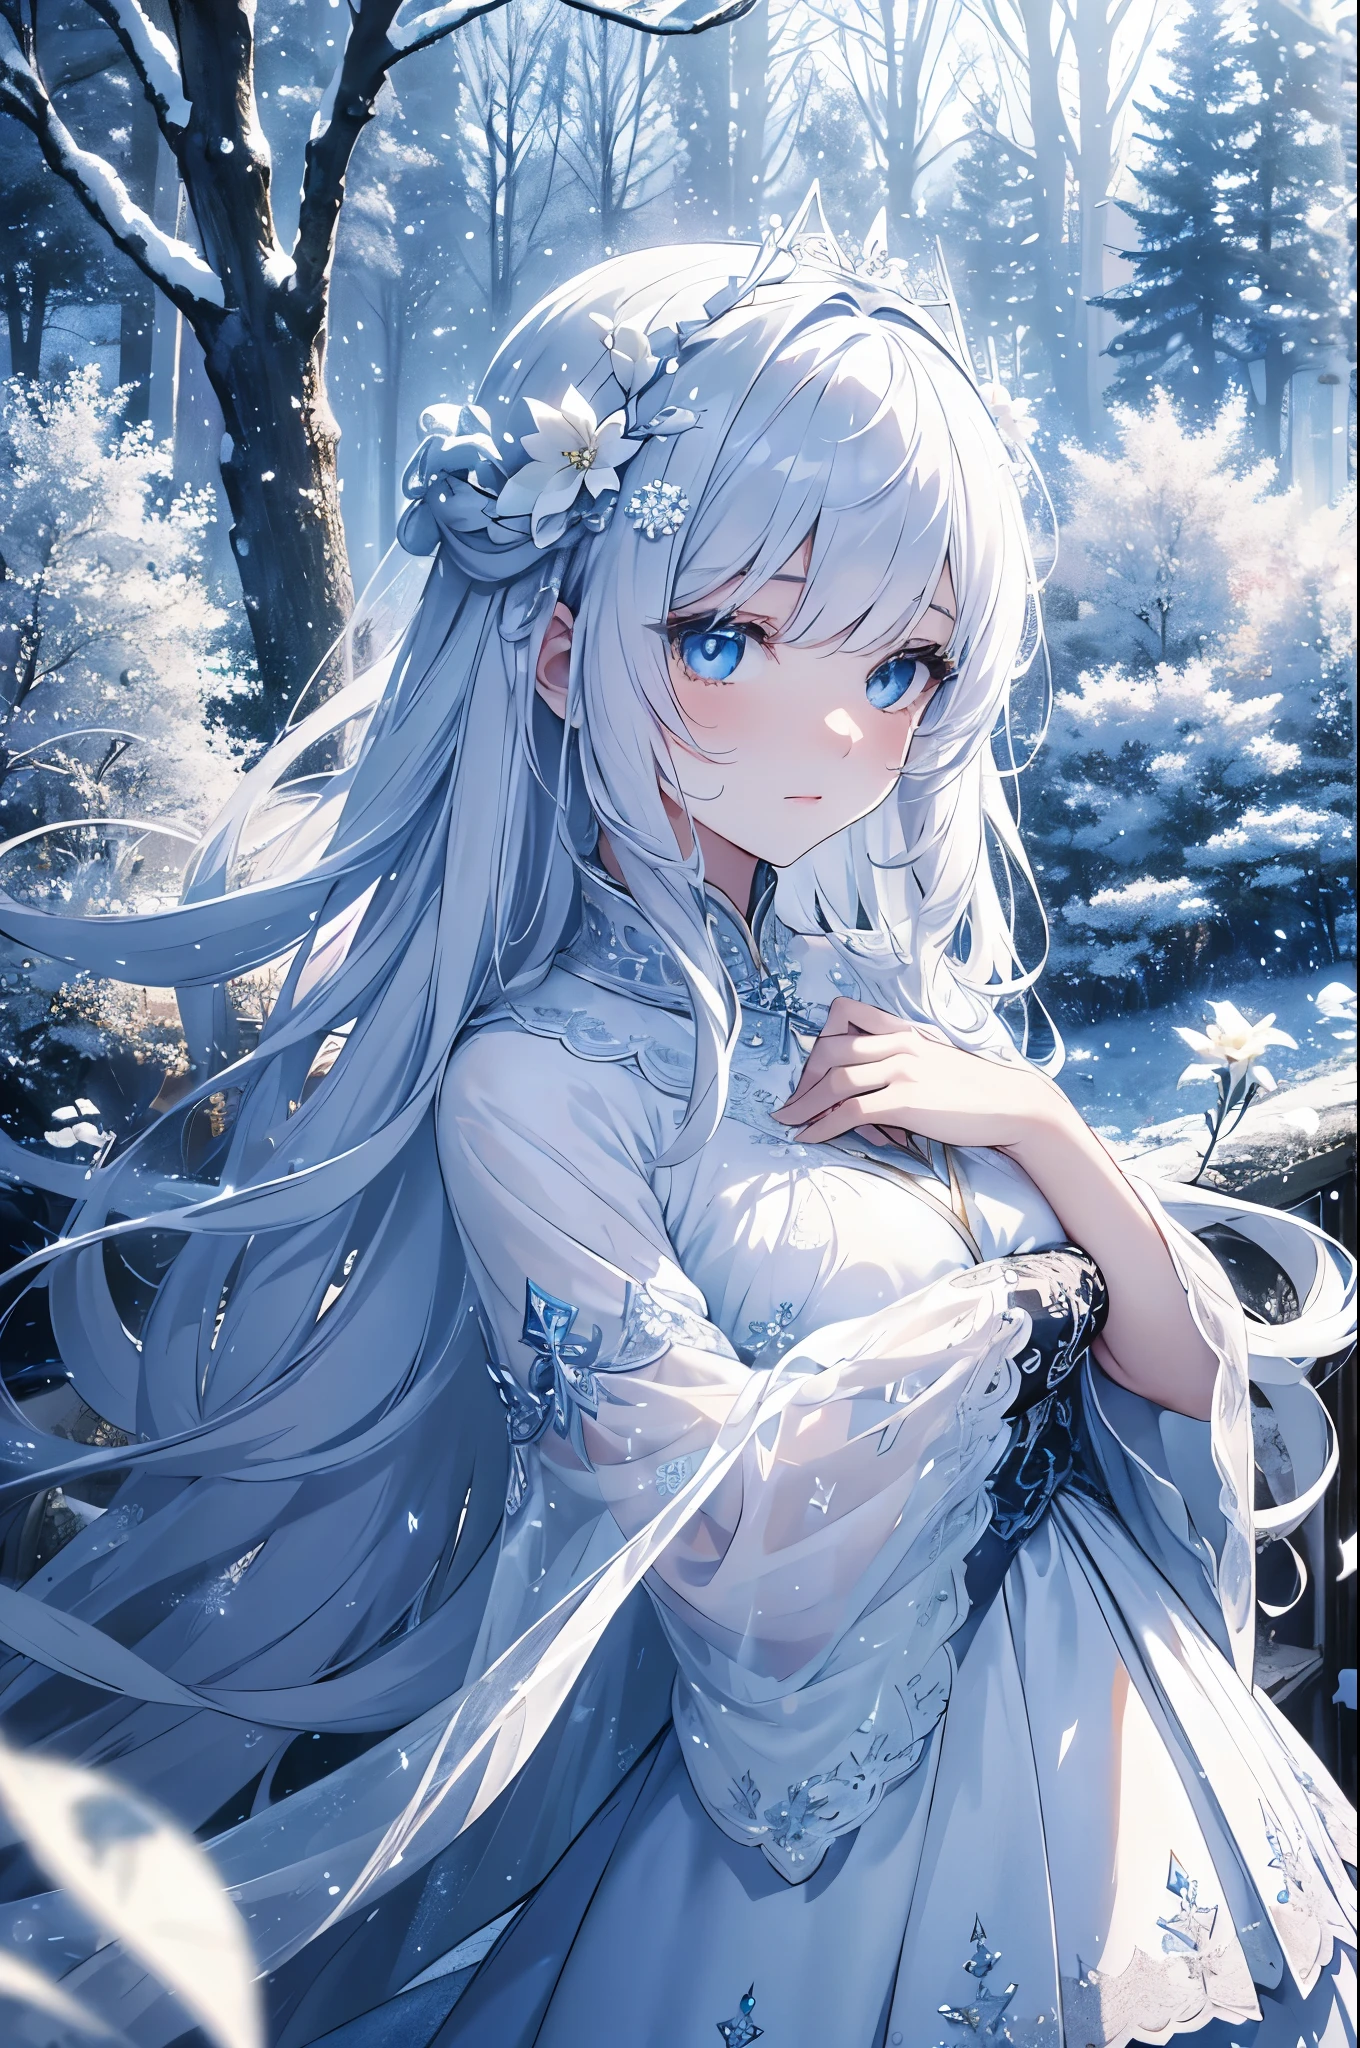 White hair girl, beautiful detailed eyes, pale skin, flowing white hair, elegant pose, fantasy setting, soft lighting, ethereal atmosphere, mesmerizing gaze, delicate features, porcelain-like complexion, long white hair cascading down her back, intricate braids adorned with flowers, silver crown on her head, sparkling snowflakes falling around her, snow-covered landscape, shimmering blue dress, graceful movement, dreamlike aura, enchanting beauty, enchanted forest, surreal color palette, delicate snowflakes melting on her fingertips, frozen breath in the air, winter wonderland scenery, magical glow surrounding her, serene expression, captivating presence, subtle hints of blue and silver, soft rays of sunlight filtering through the trees, tranquility and peace in her presence, icy blue eyes reflecting the beauty of her surroundings, dreamy and otherworldly atmosphere, a touch of mystery, artistic masterpiece, high resolution details, stunning portrait, portrait in a fairytale world.